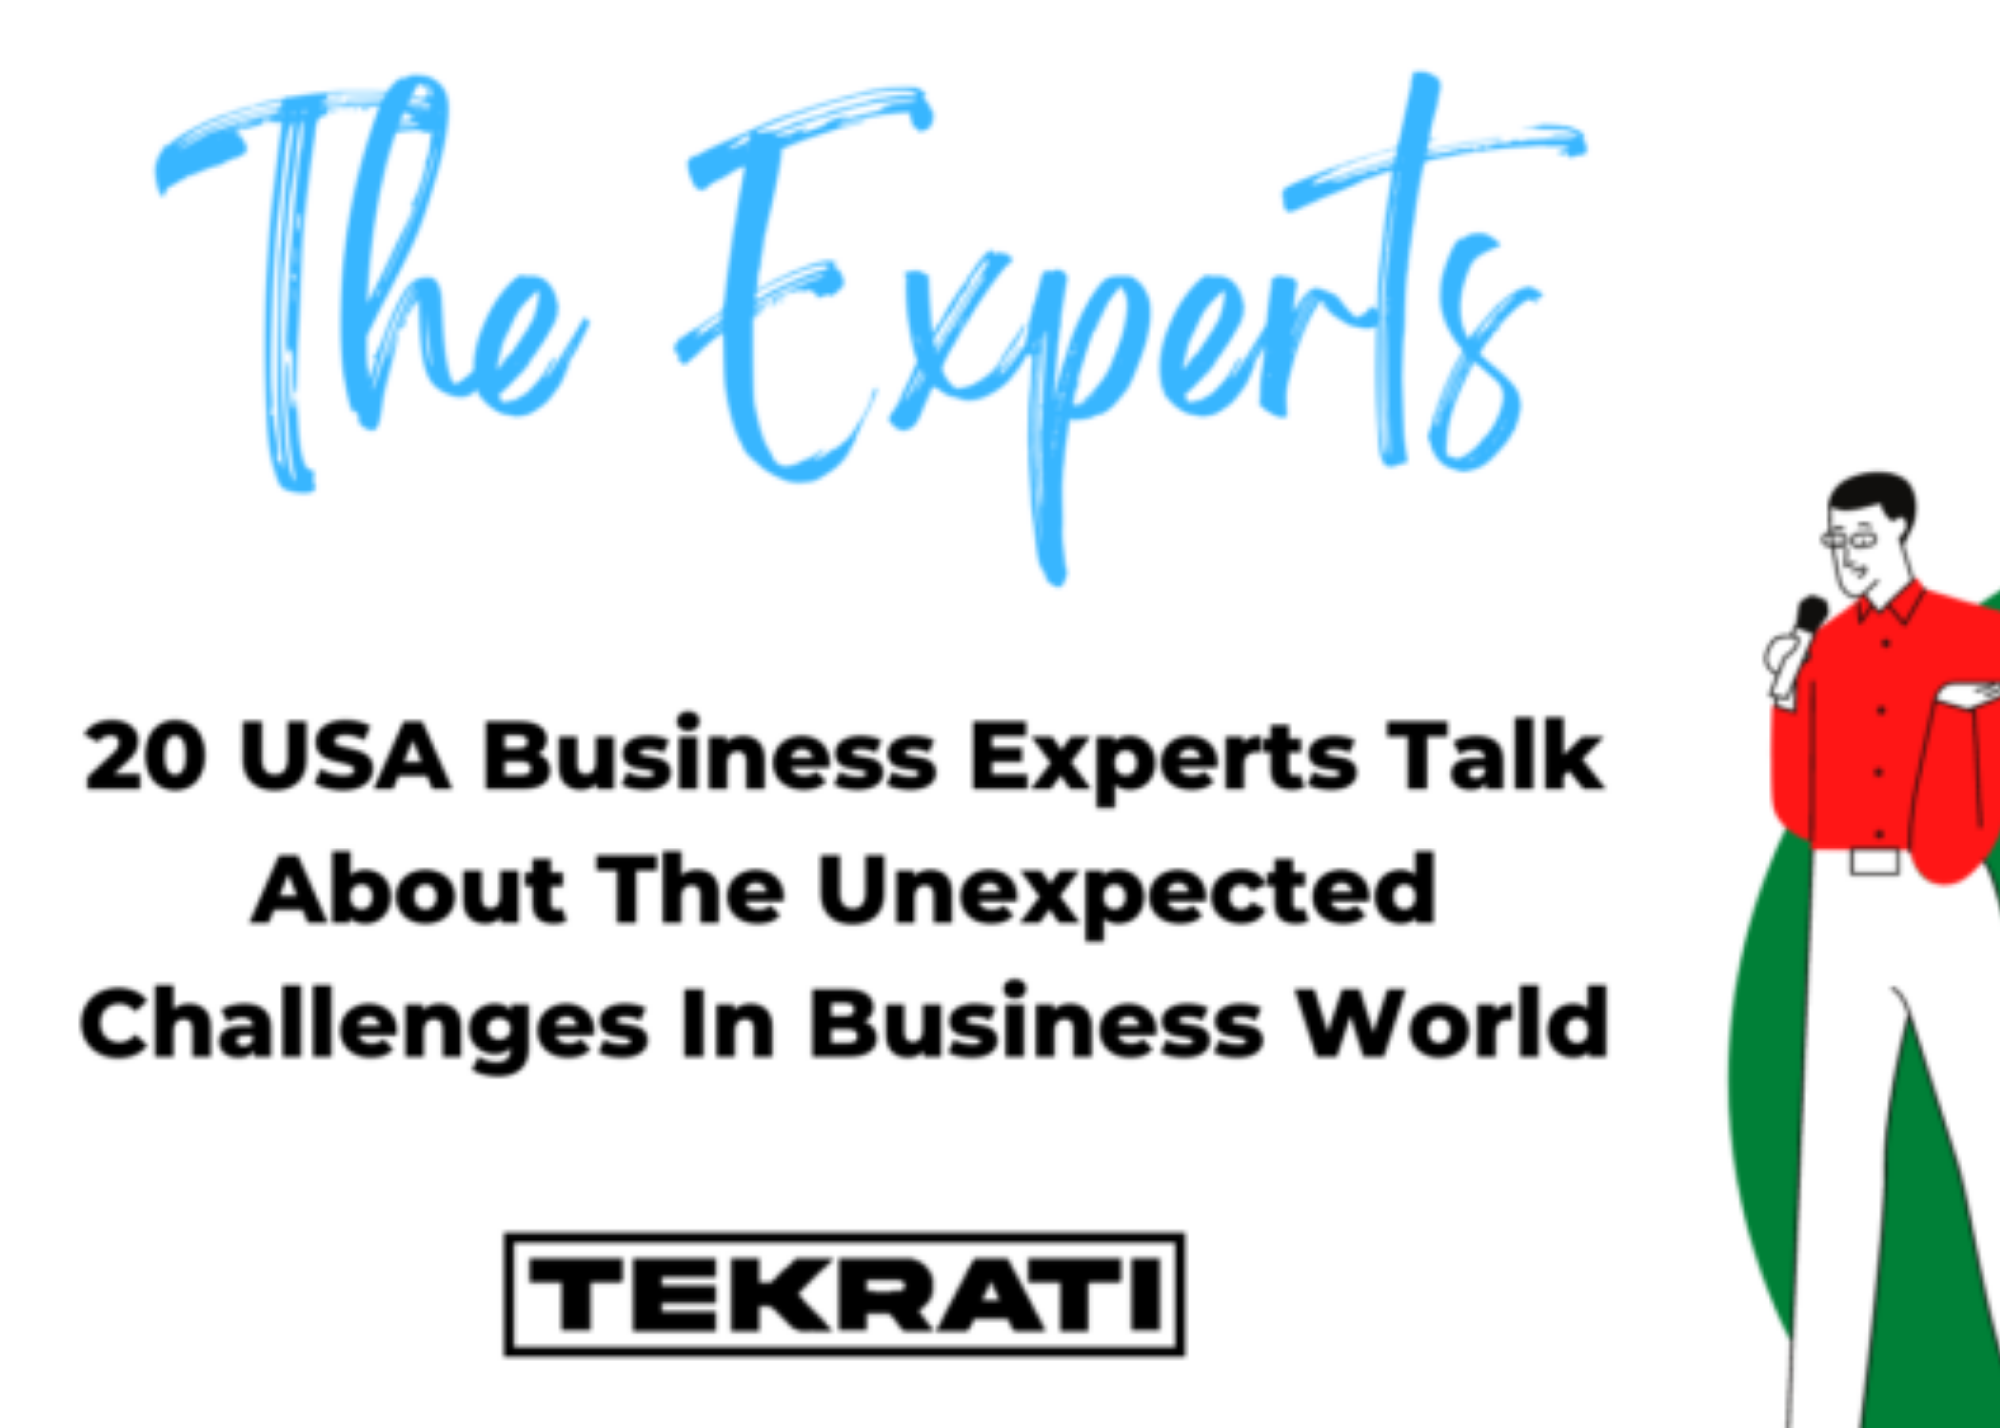 20 USA Business Experts Talk About The Unexpected Challenges In Business World